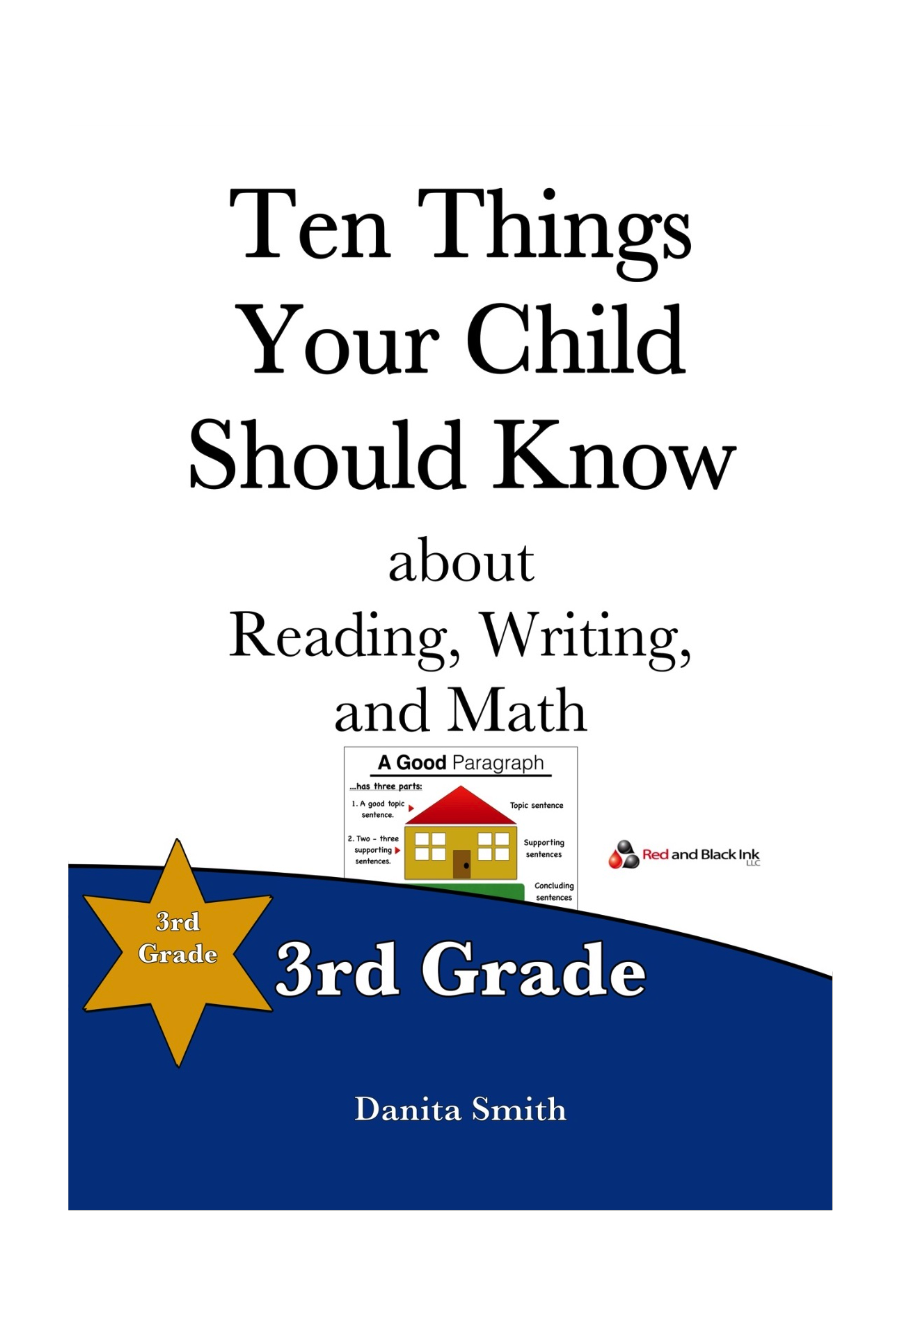 Final - Ten Things Your Child Should Know 3rd Grade.png